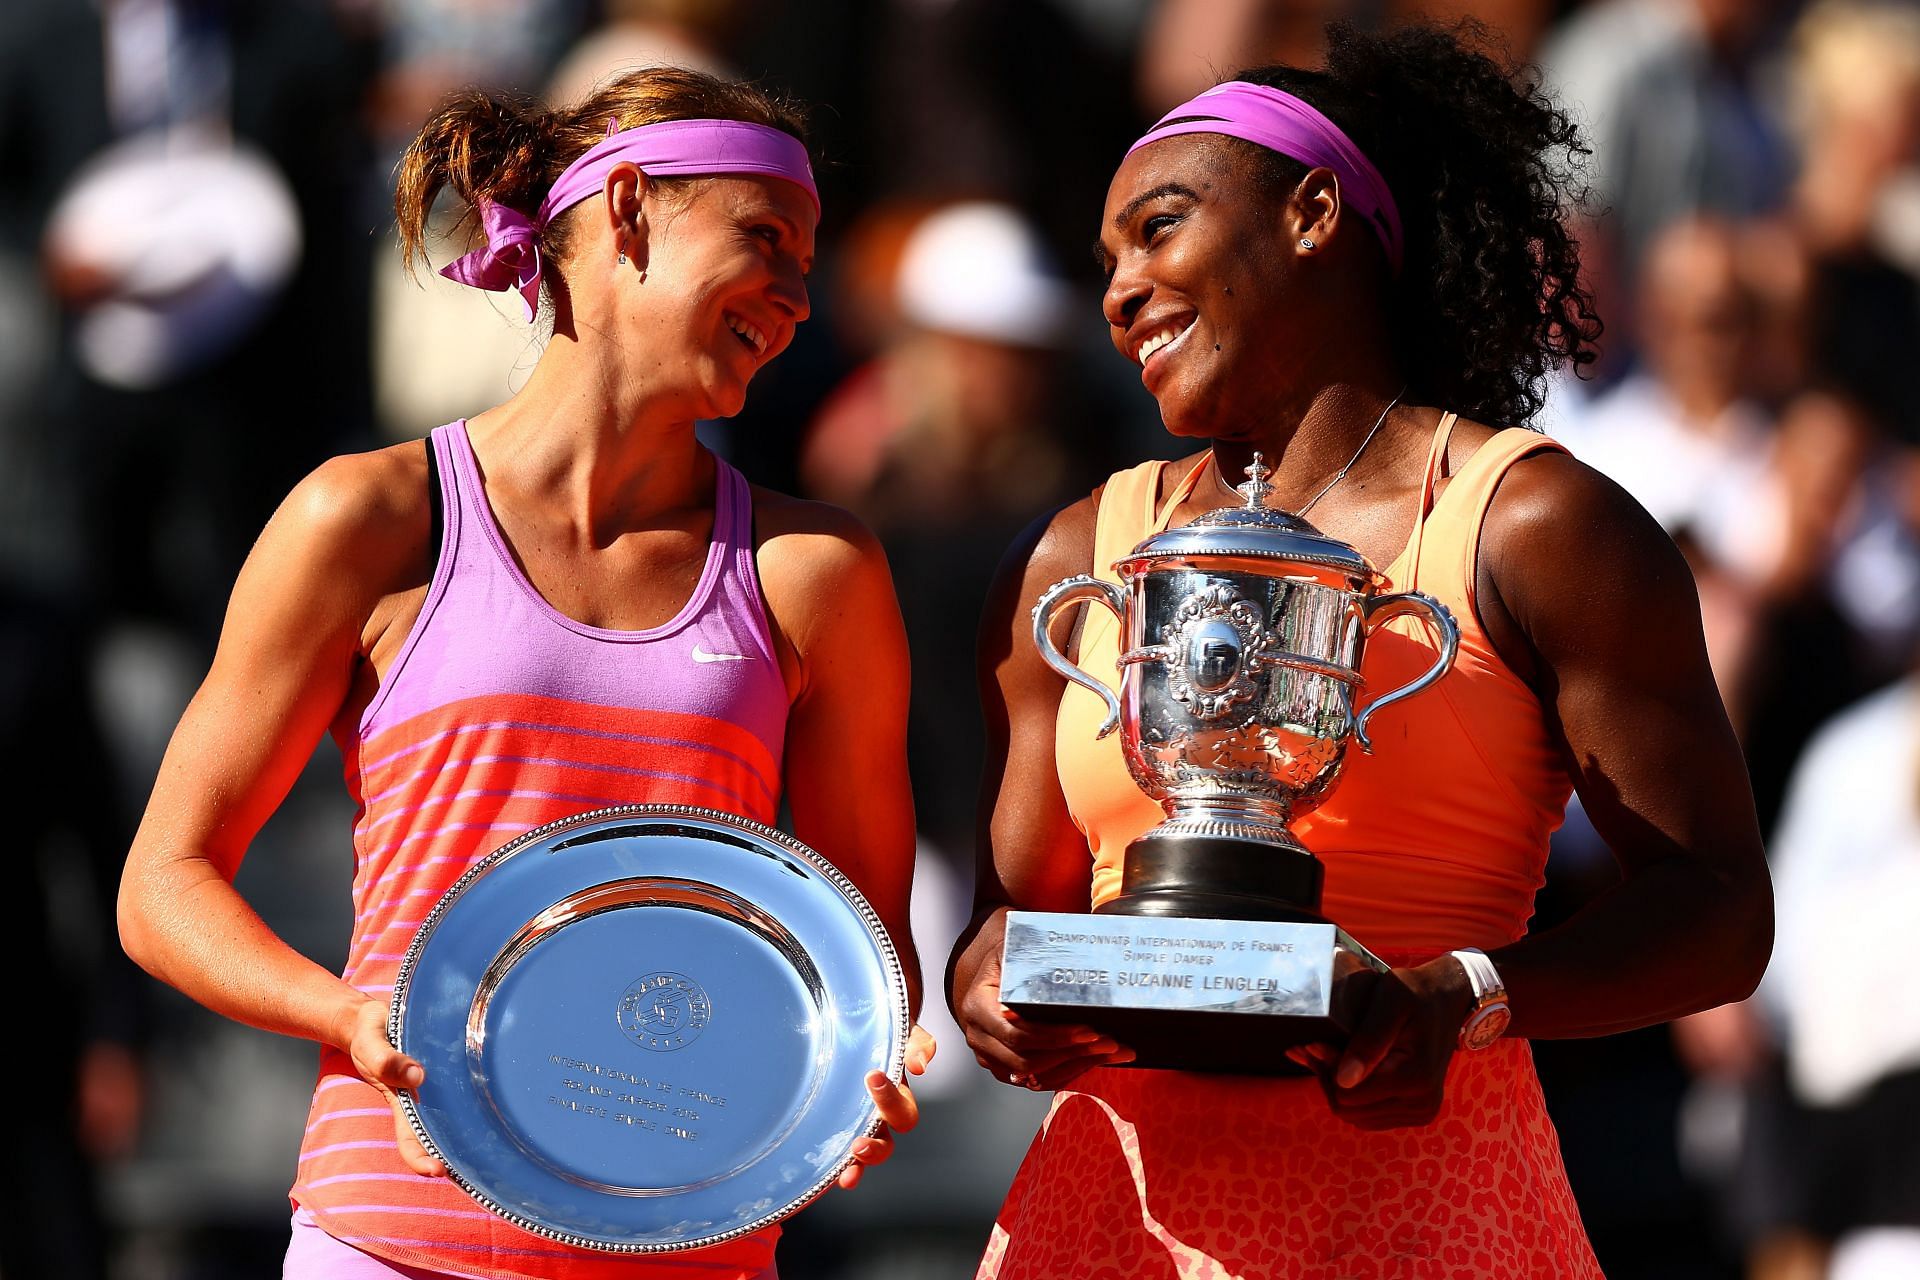 Serena Williams and Lucie Safarova with their respective trophies at the 2015 French Open